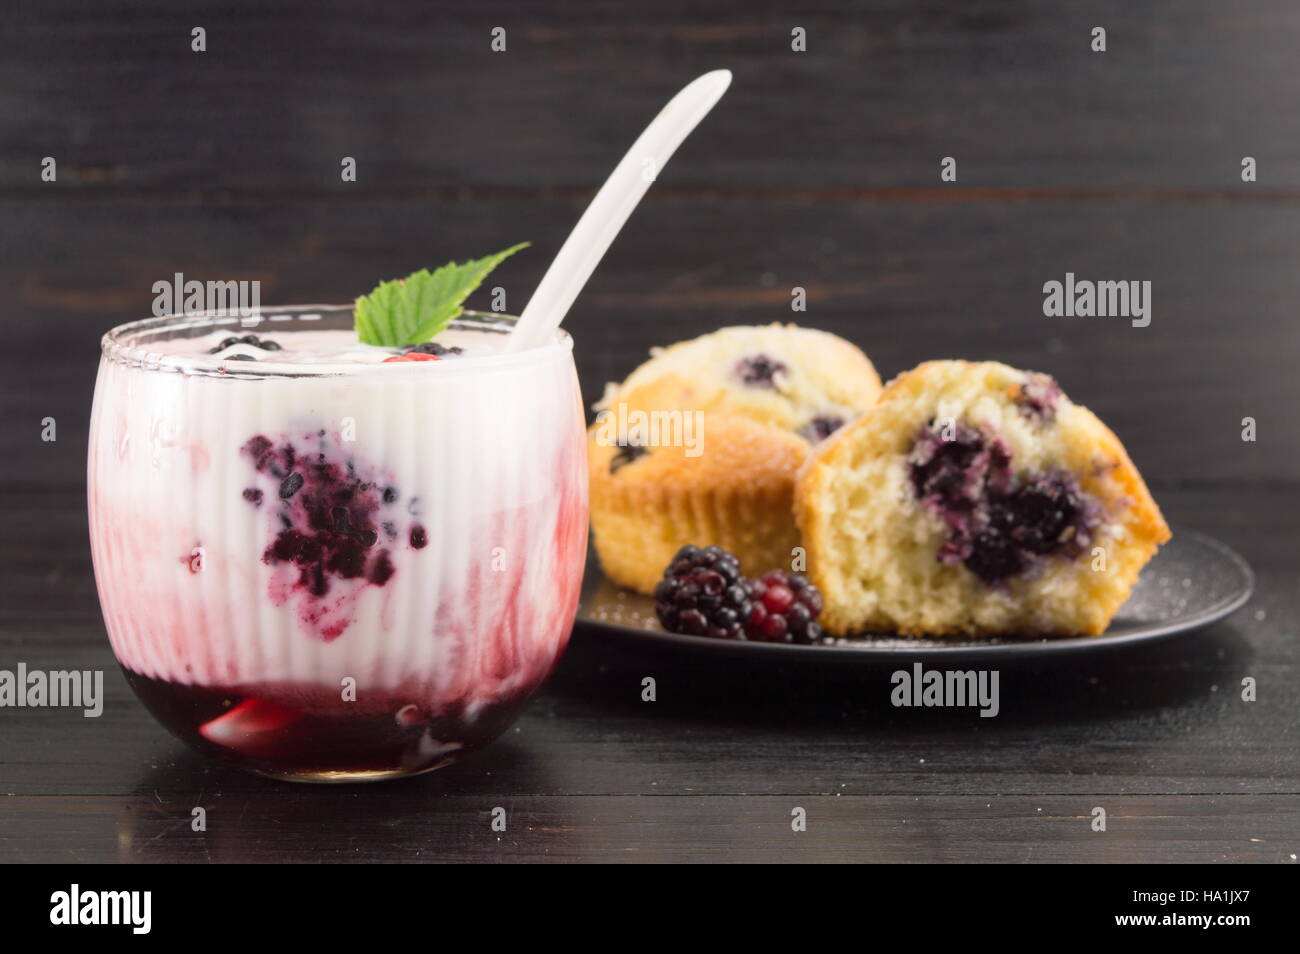 Homemade blackberry parfait and muffins Stock Photo